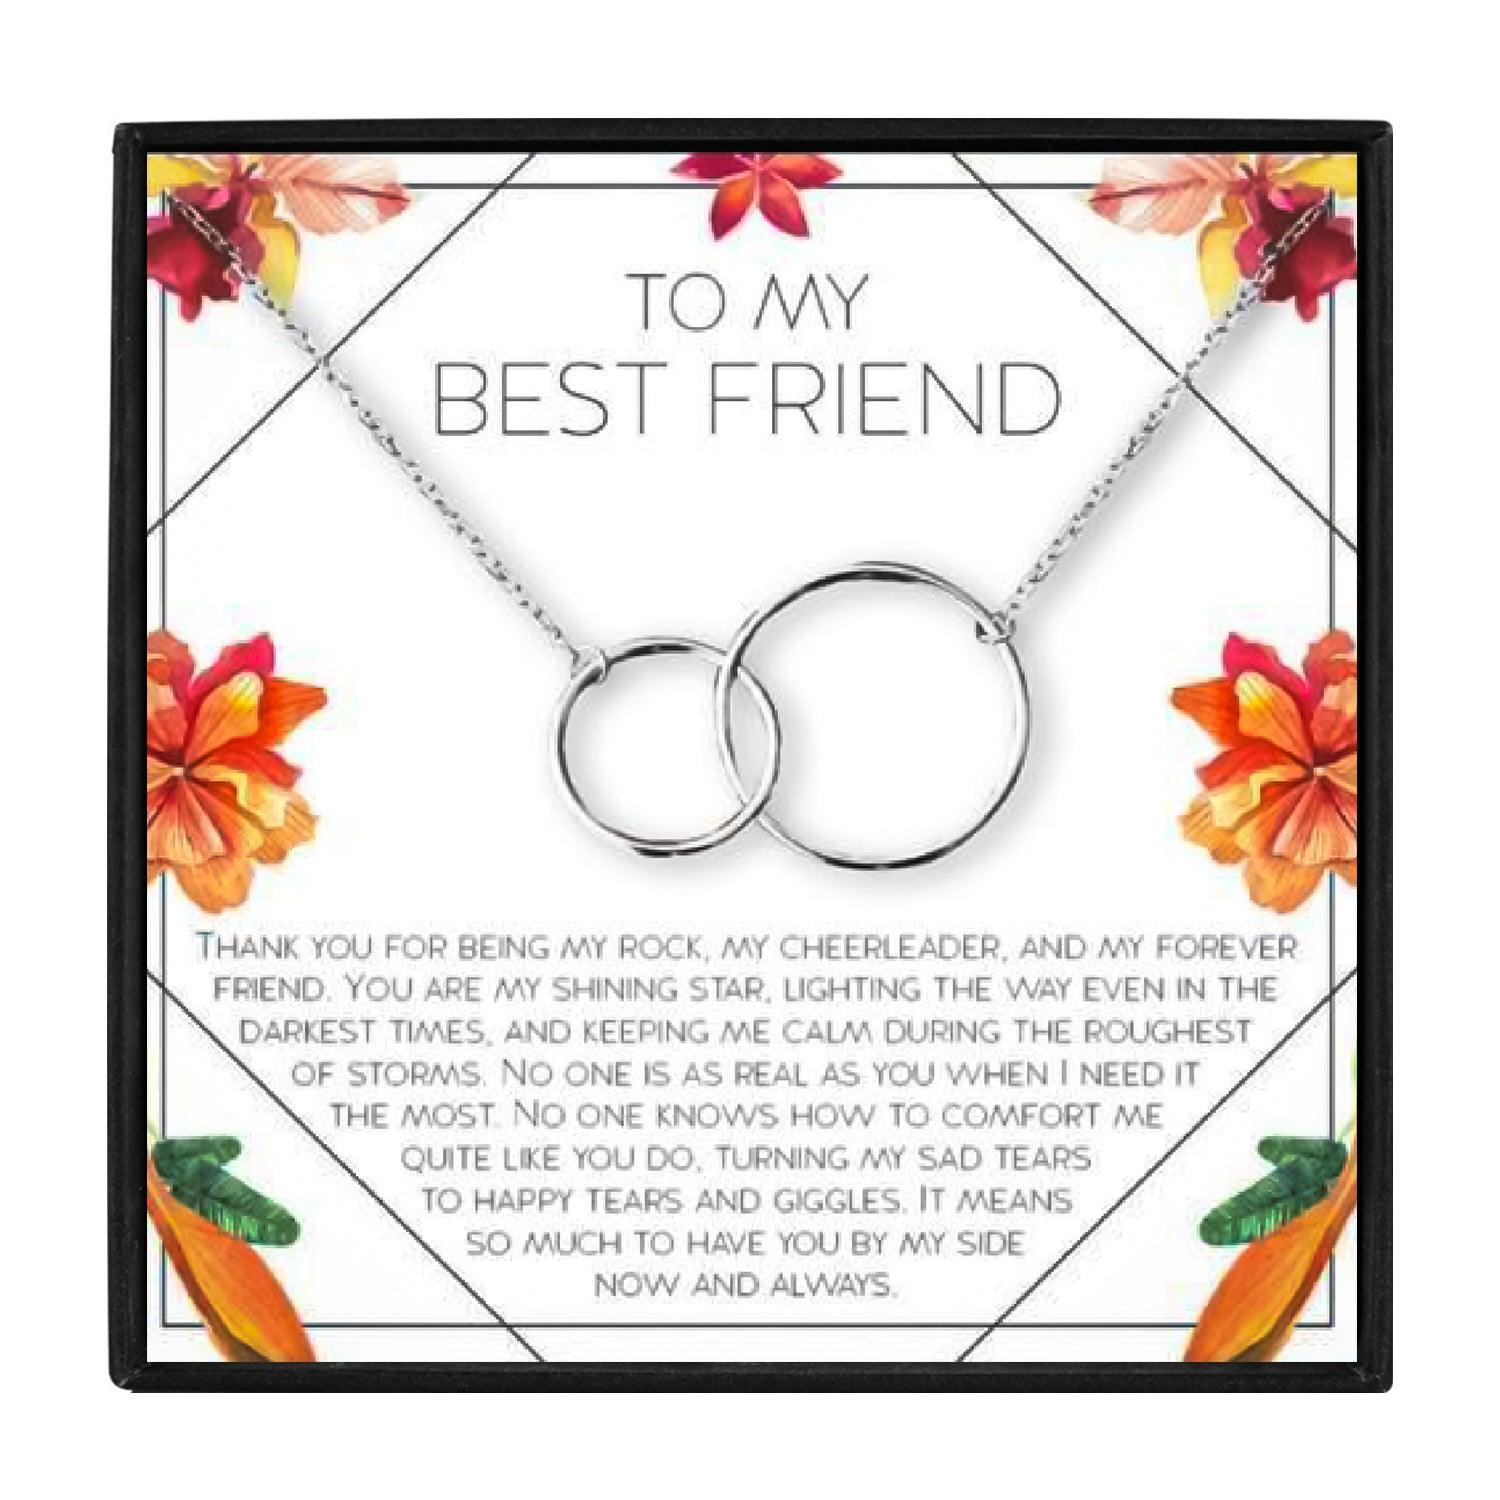 Rose Gold Necklace for Best Friends in 2023 | Rose Gold Necklace for Best Friends - undefined | Best Friends gift ideas, gift ideas, gift ideas for Best Friends, Rose Gold Necklace, Rose Gold Necklace for Best Friends | From Hunny Life | hunnylife.com